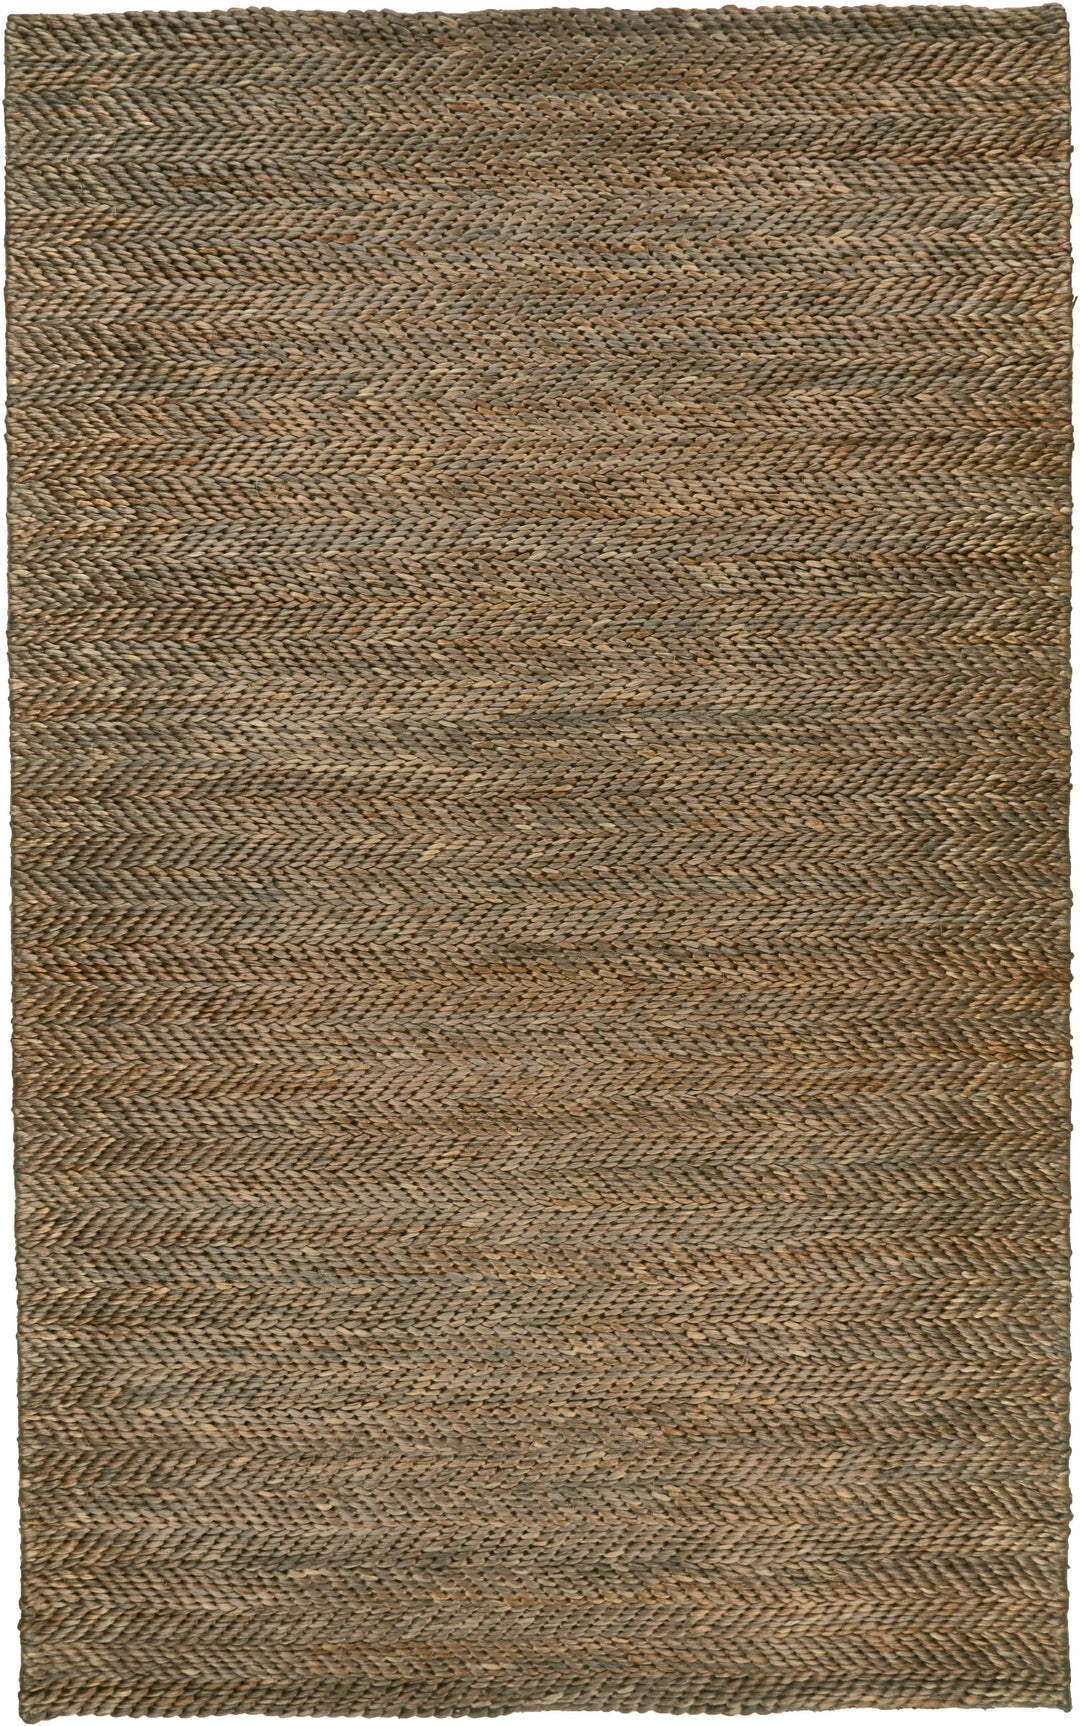 Feizy Feizy Kaelani Natural Handmade Rug - Available in 5 Sizes - Tan & Gray 4' x 6' 6850770FMOC000C00